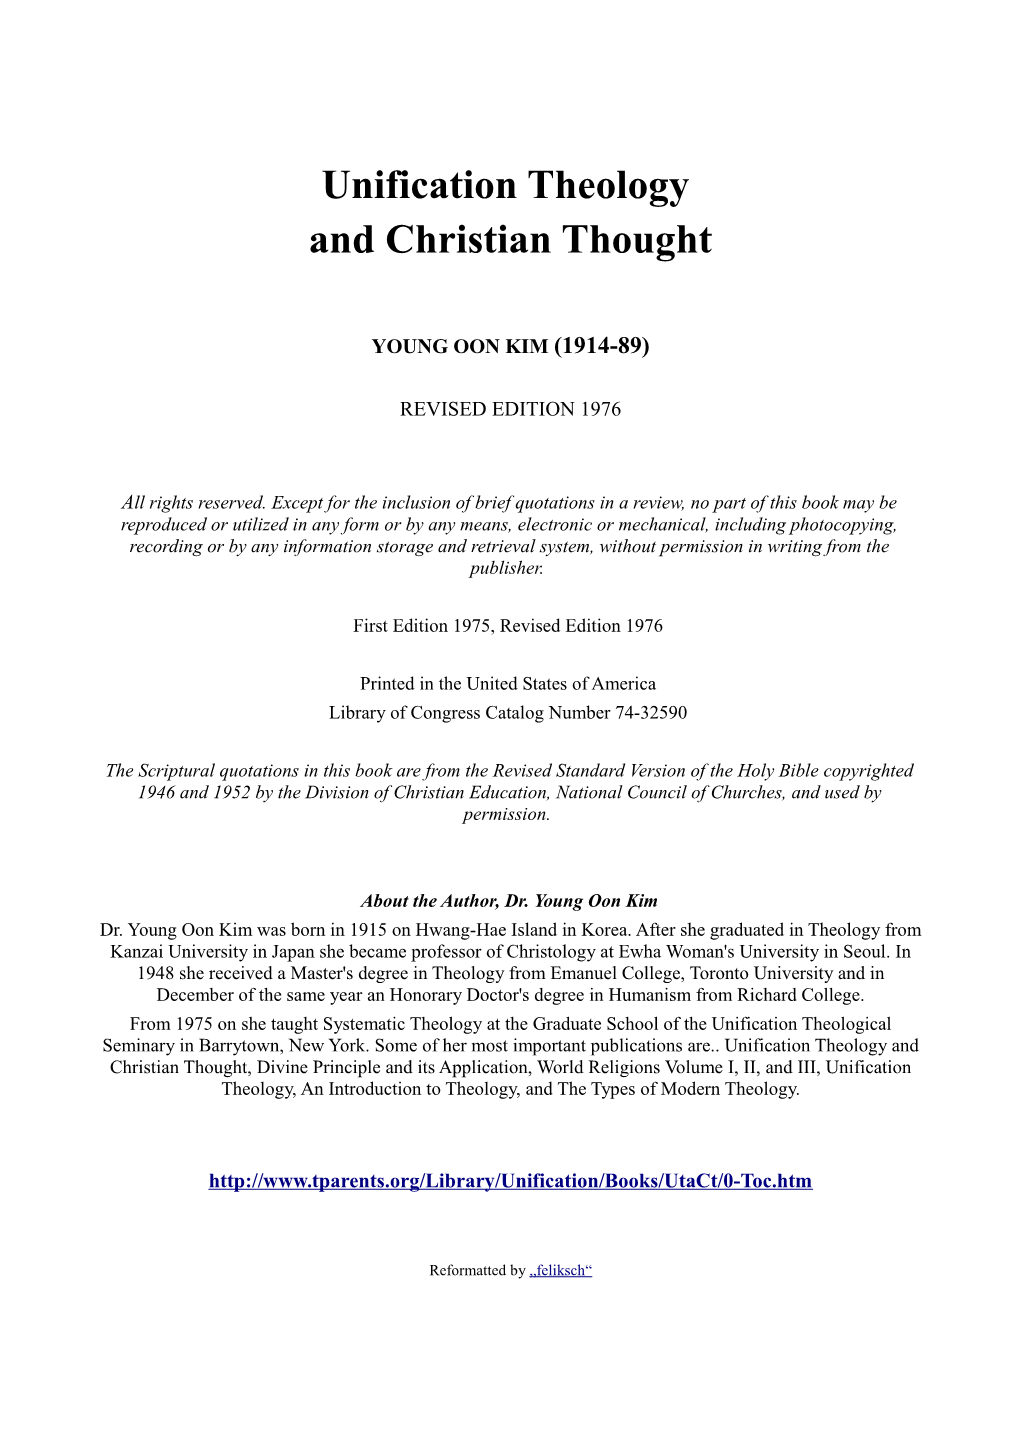 Unification Theology and Christian Thought